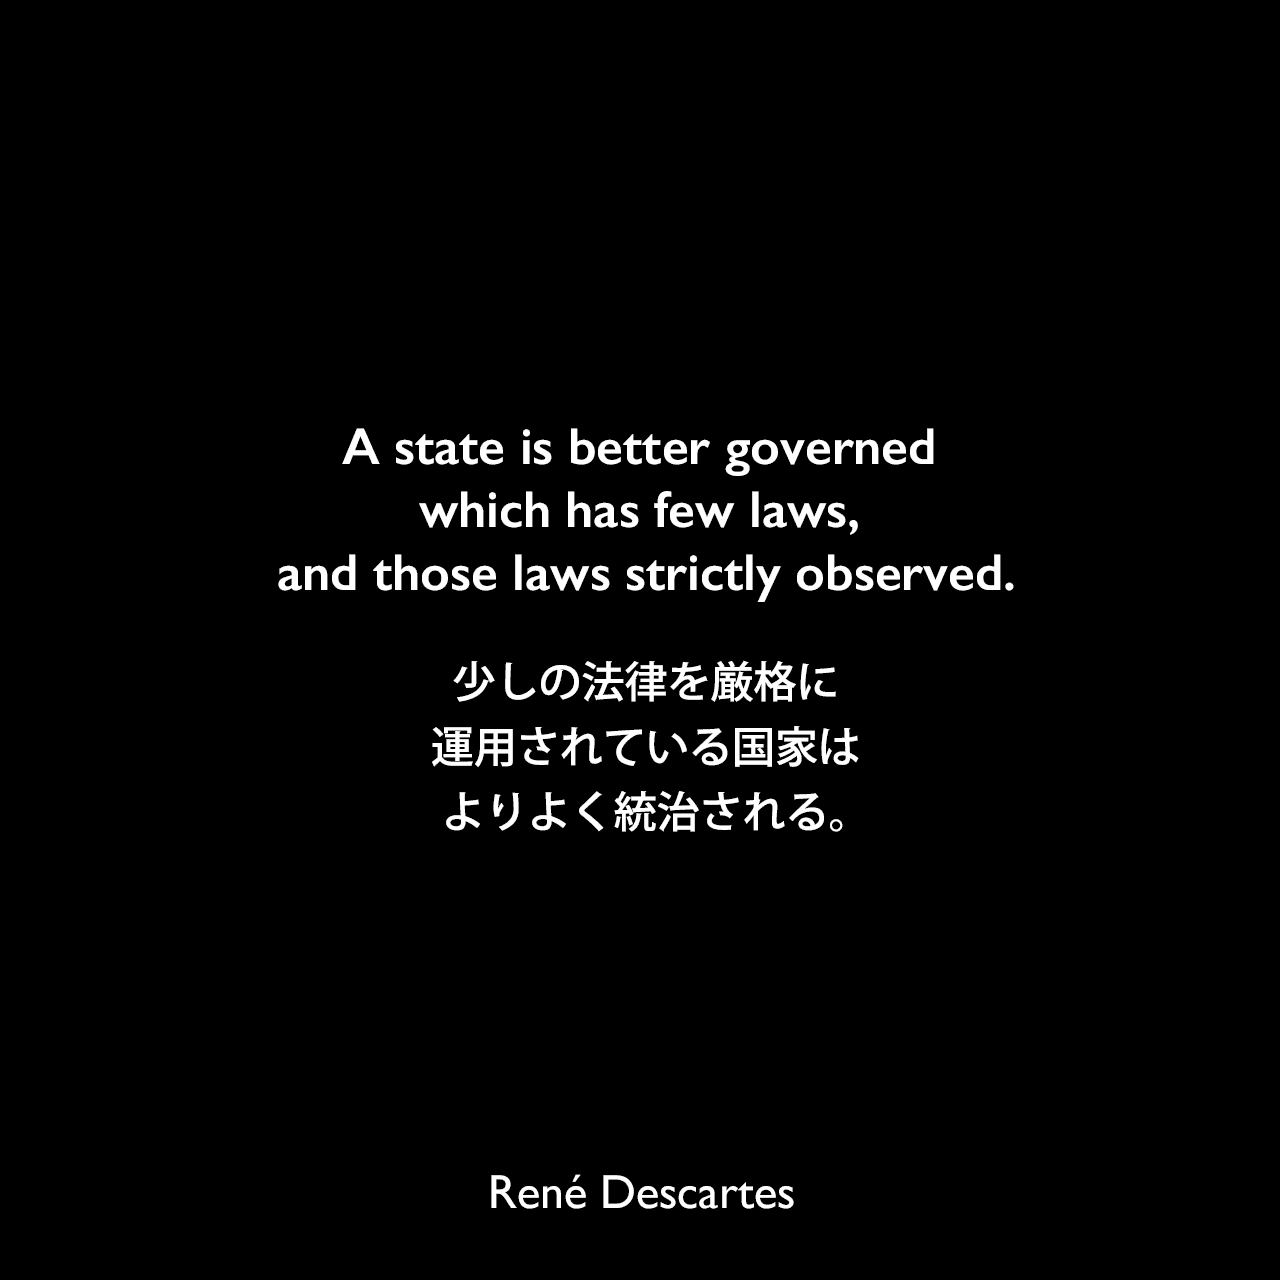 A state is better governed which has few laws, and those laws strictly observed.少しの法律を厳格に運用されている国家はよりよく統治される。René Descartes